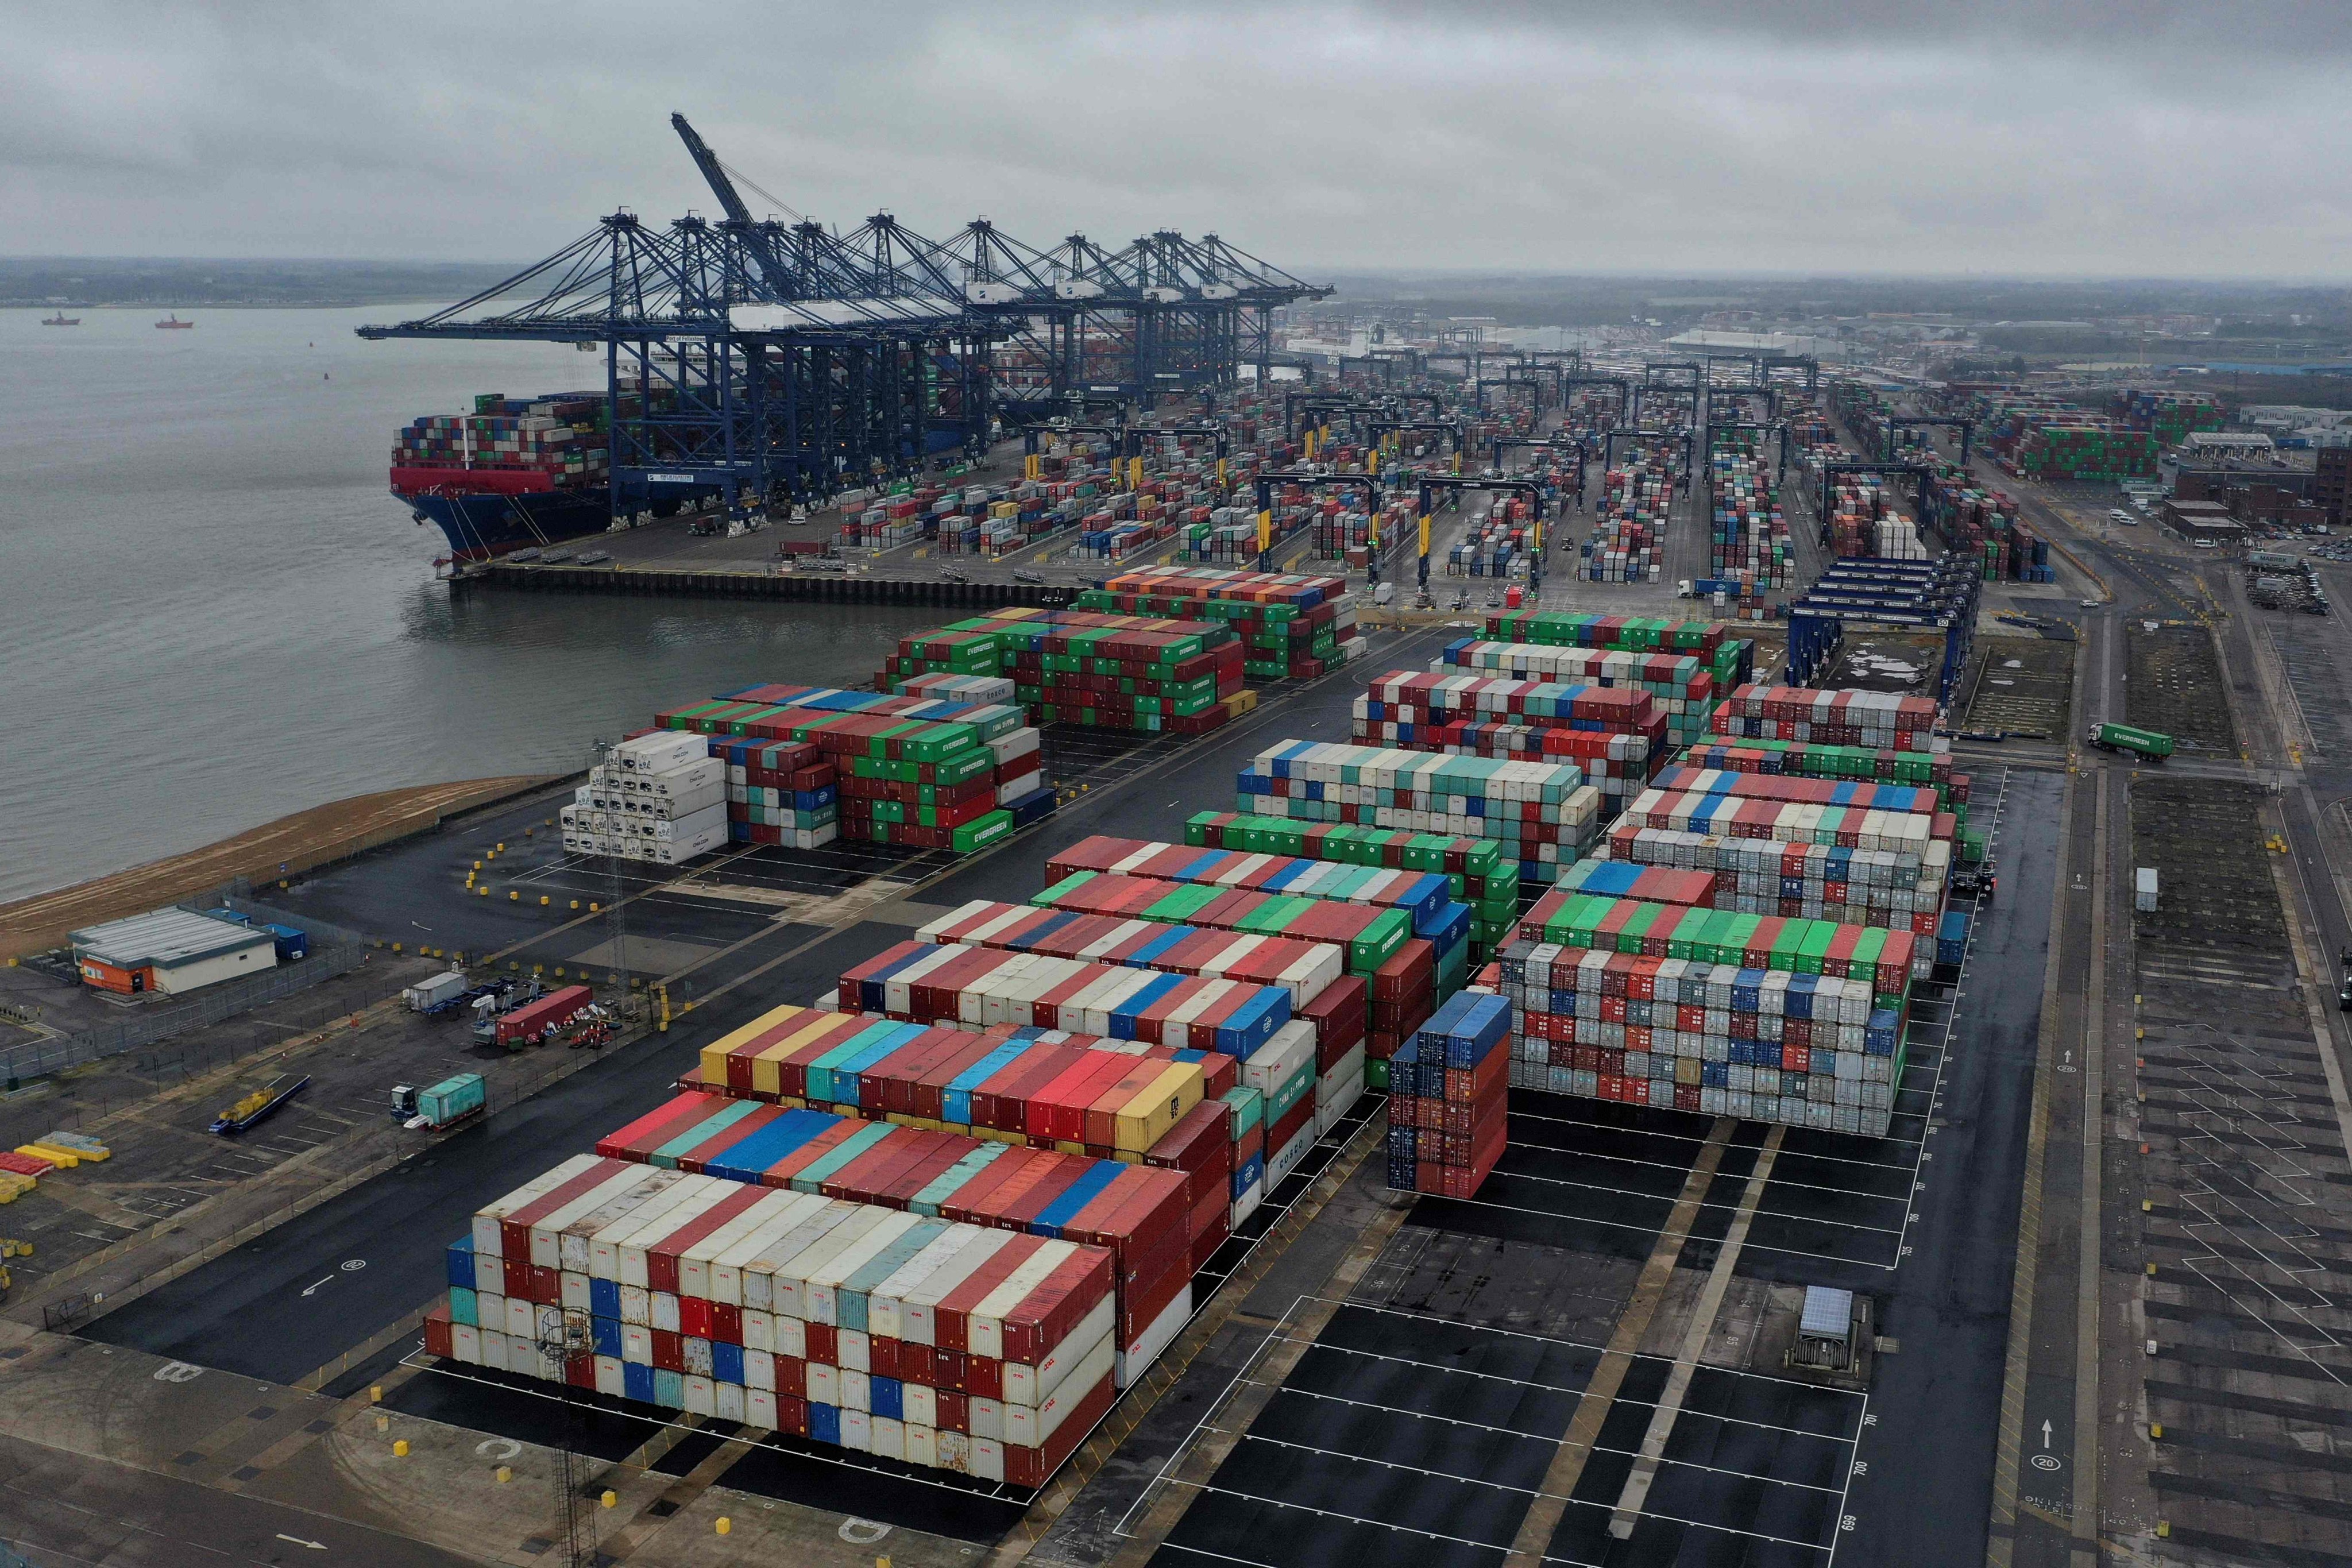 Shipping containers are seen in the Port of Felixstowe, east of London, in March 2021. The trade deal with India could help Britain open up access to the vast Indian market. Photo: AFP